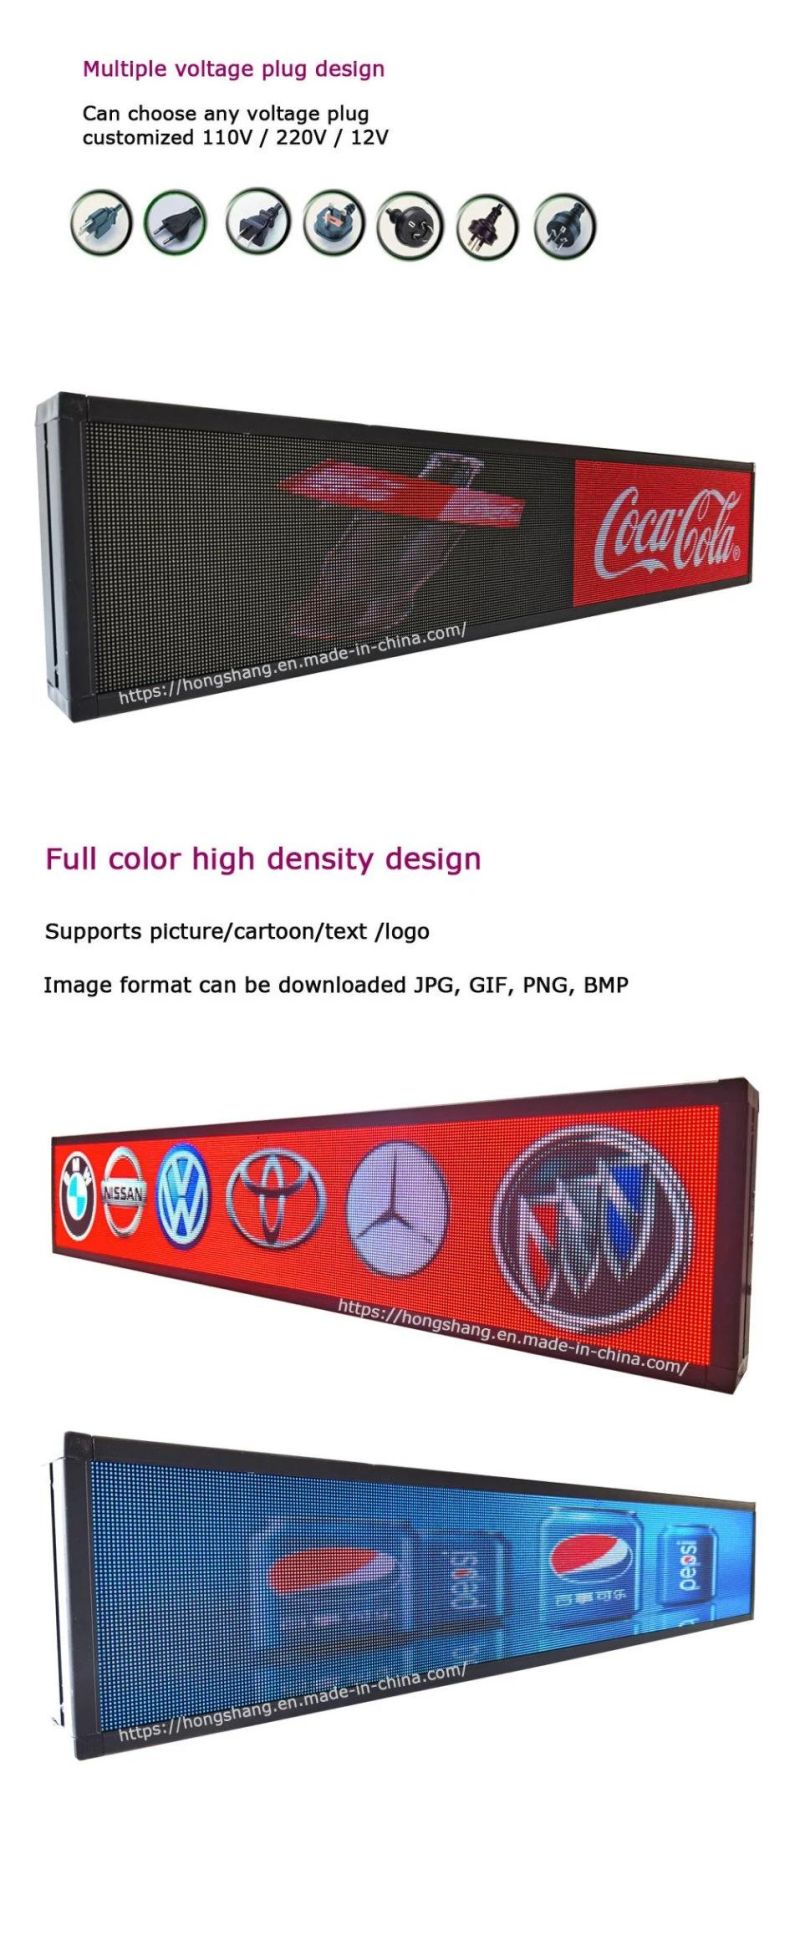 Manufacturing High Quality LED Display, Indoor Advertising Screen, Commercial LED TV